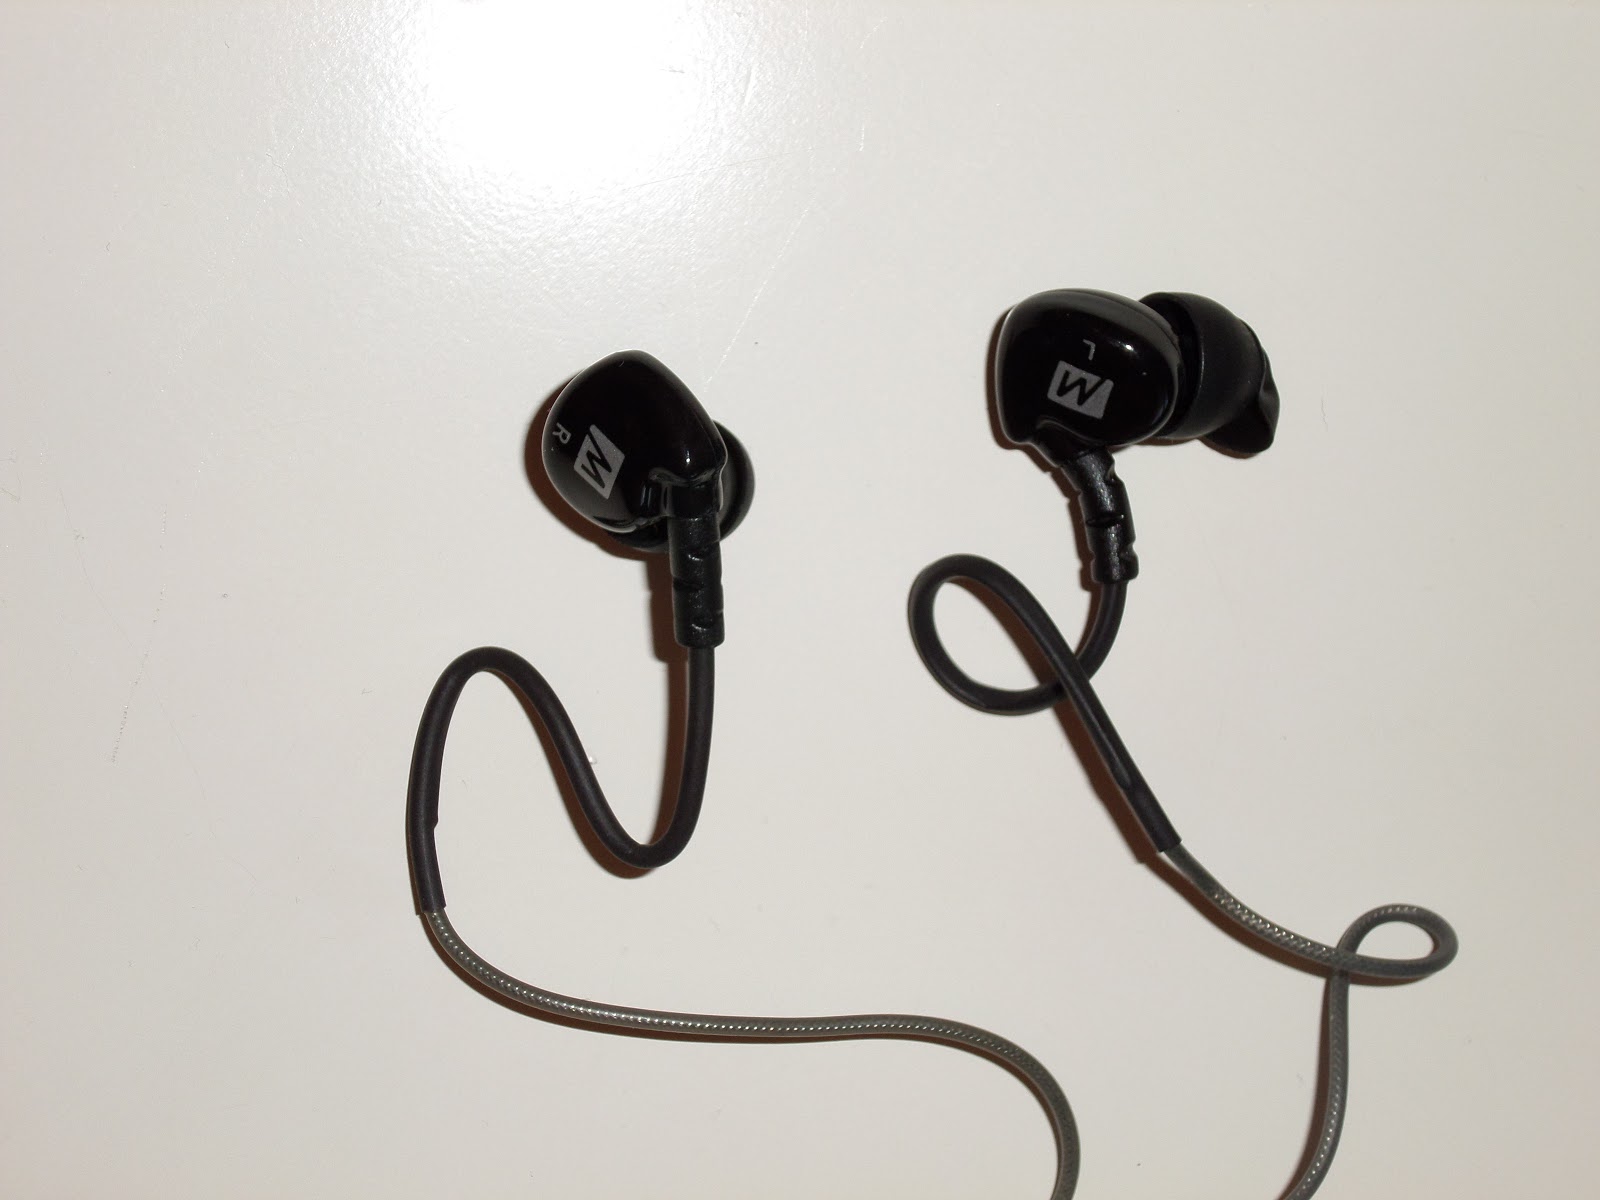 [REVIEW] MEE Audio M6P Headsets